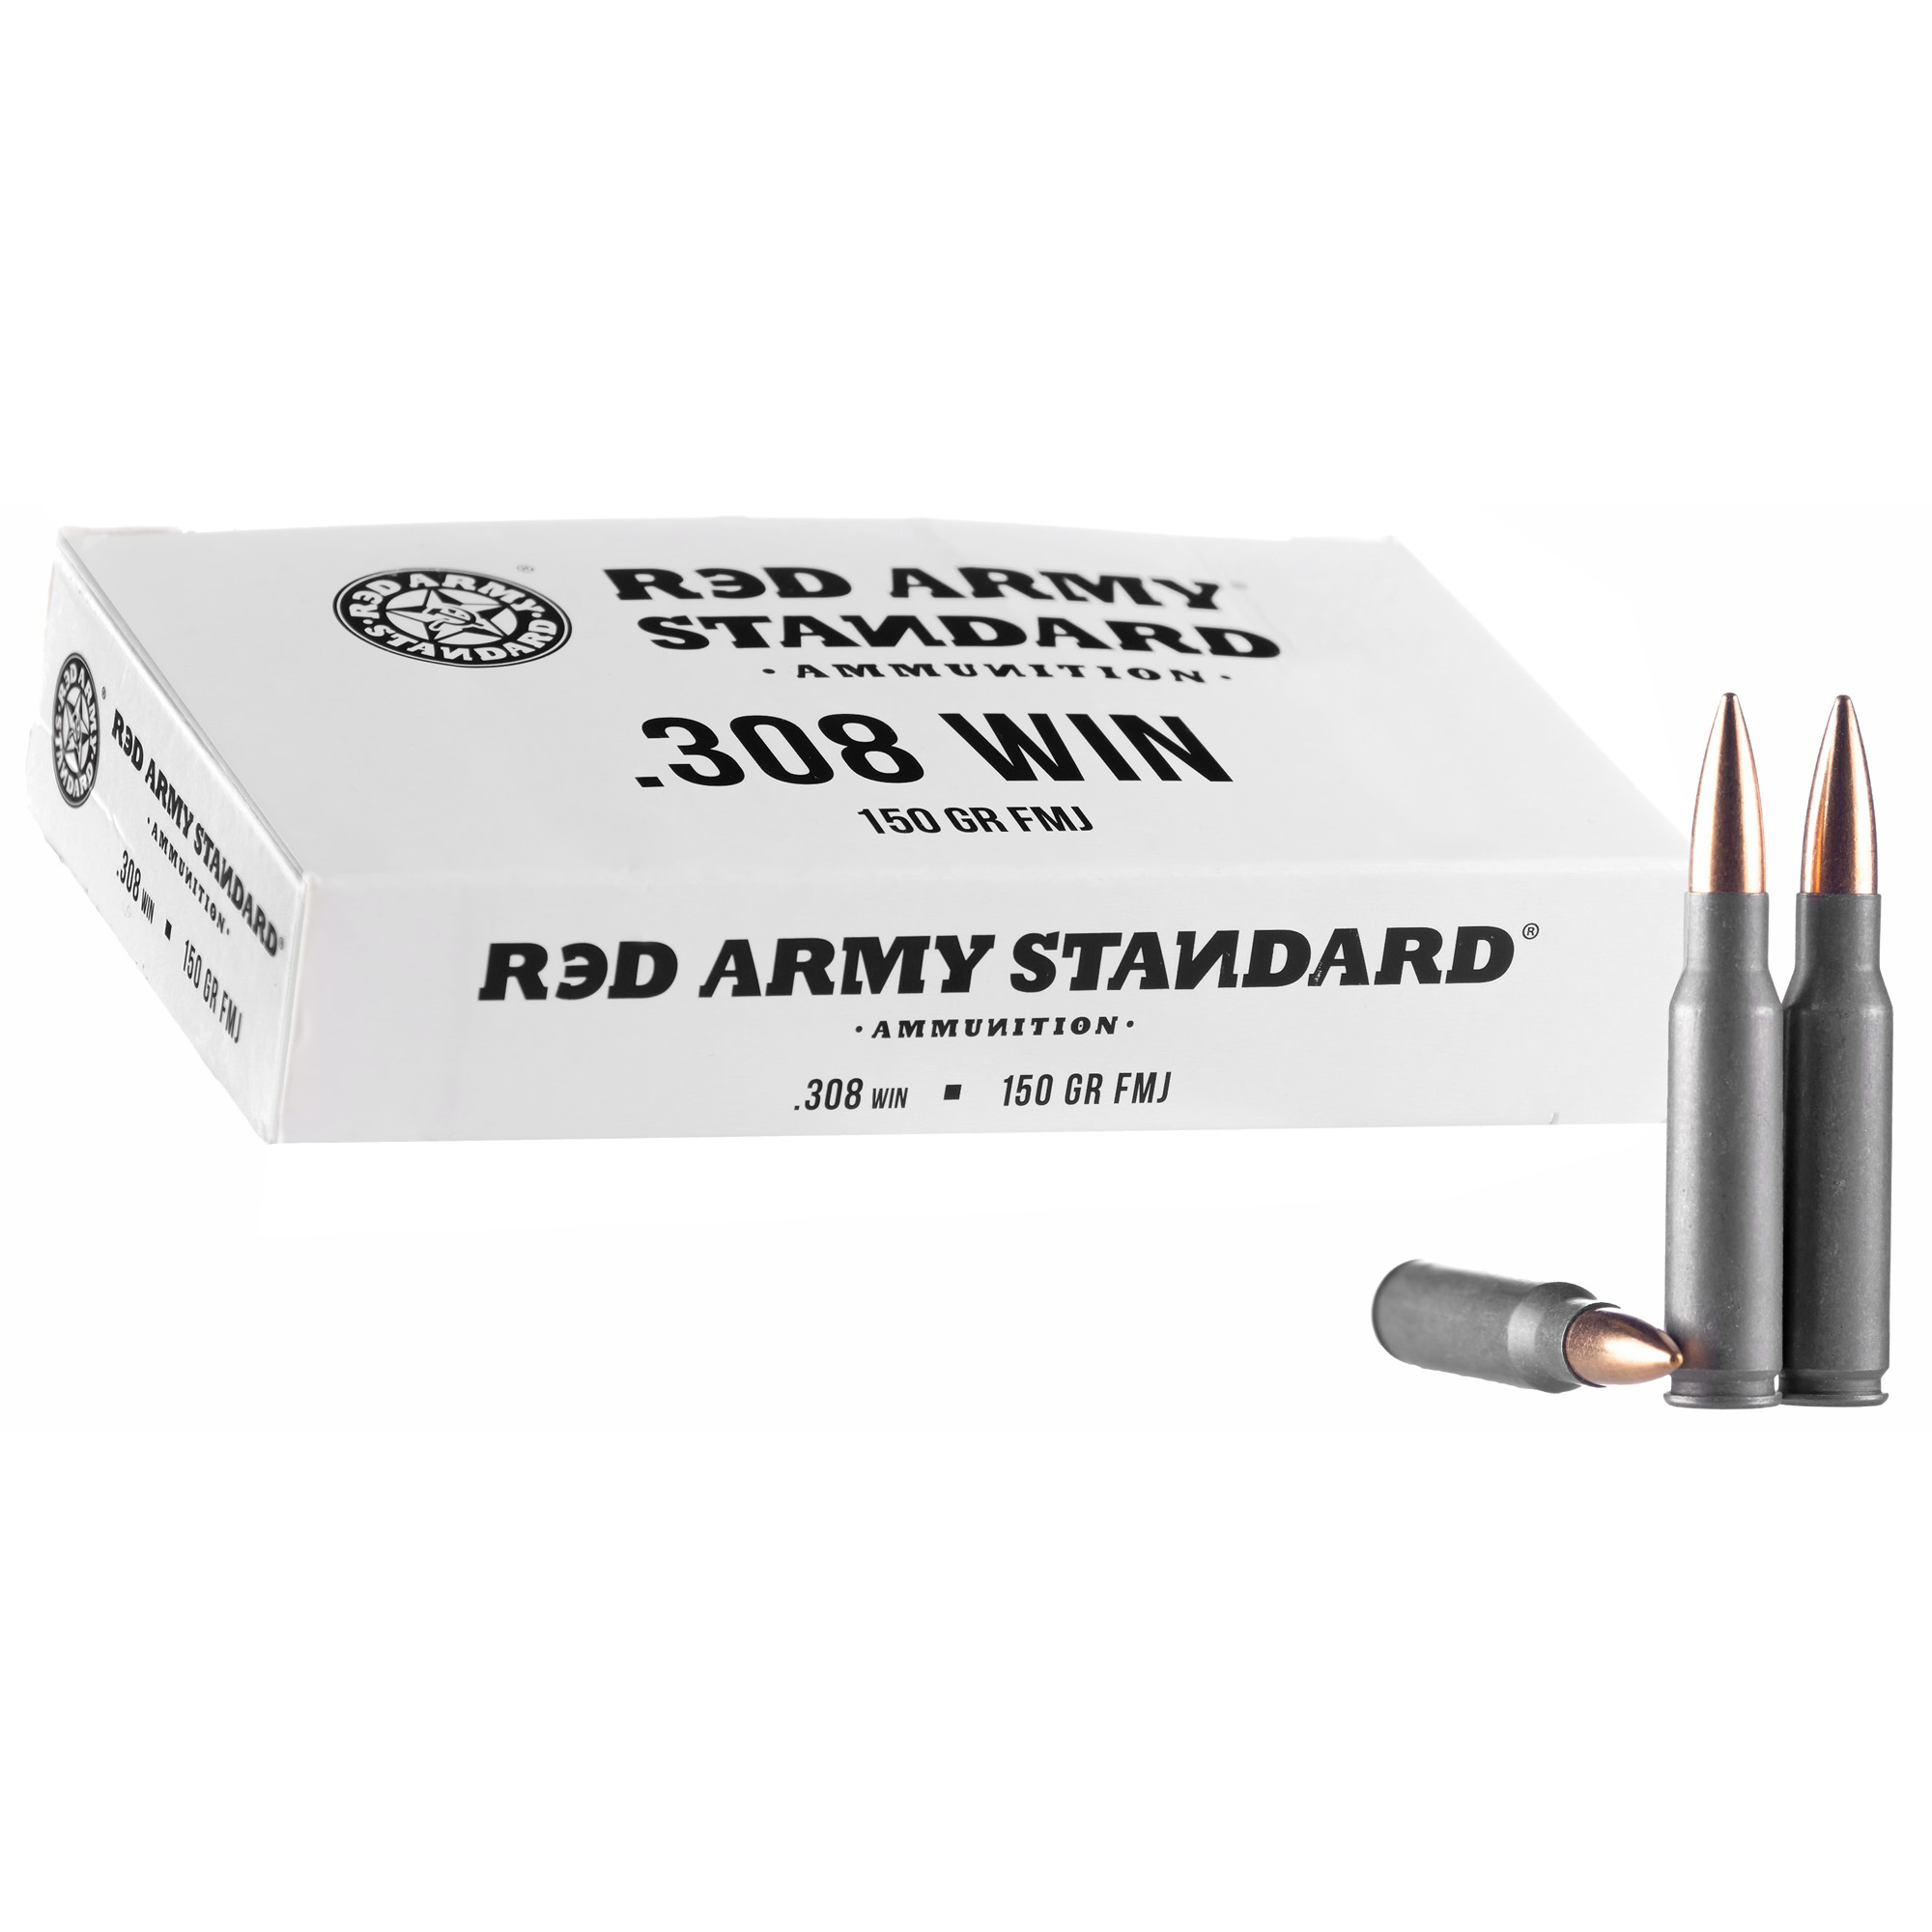 Red Army Standard AM3090 Red Army Standard 308 Win 150 gr Full Metal Jacket